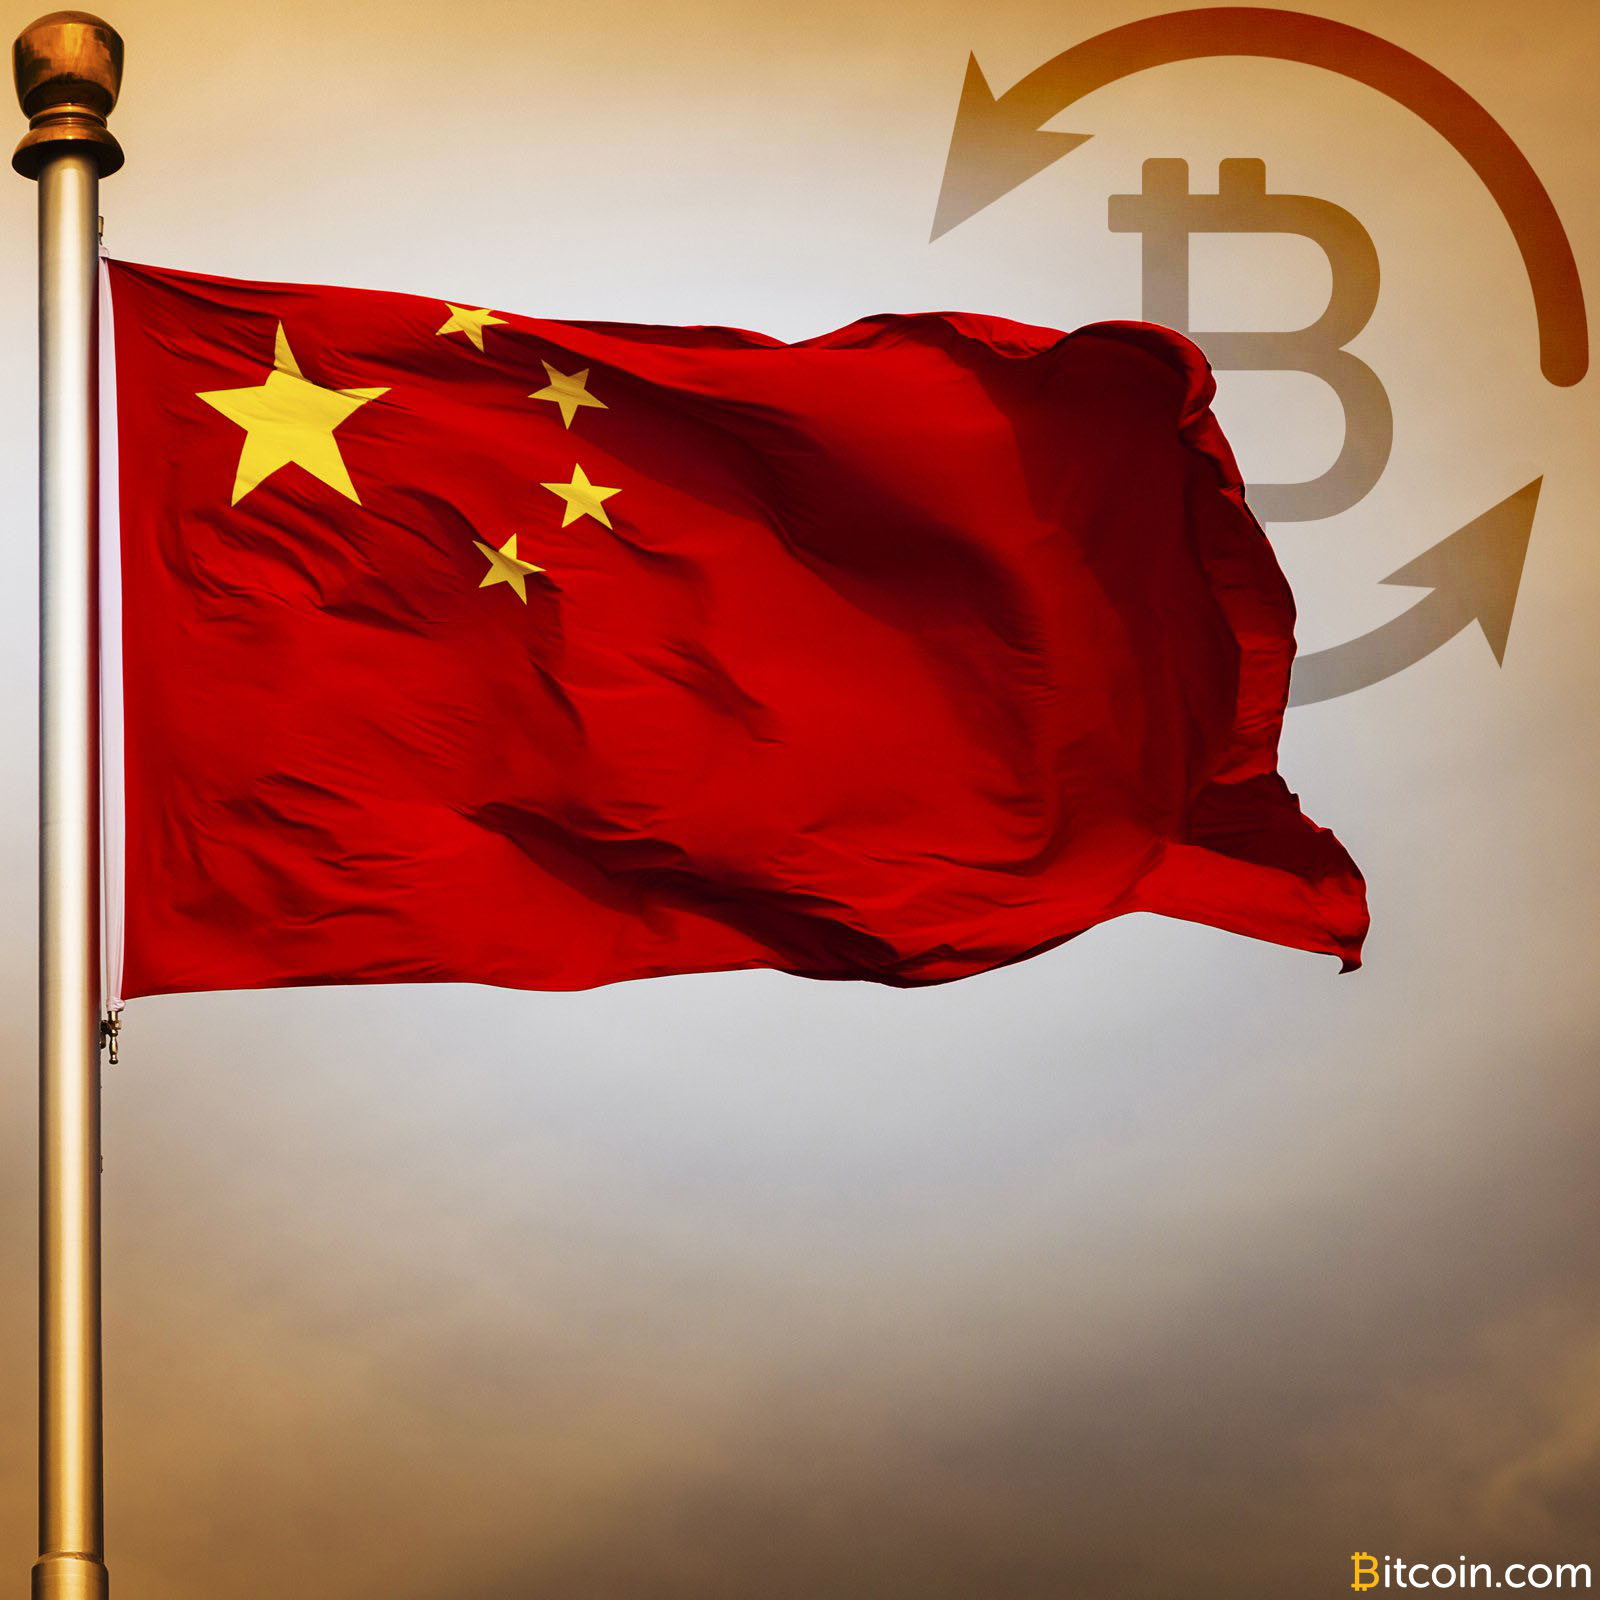 China's Regulatory Crackdown Forces More Bitcoin Exchange Closures